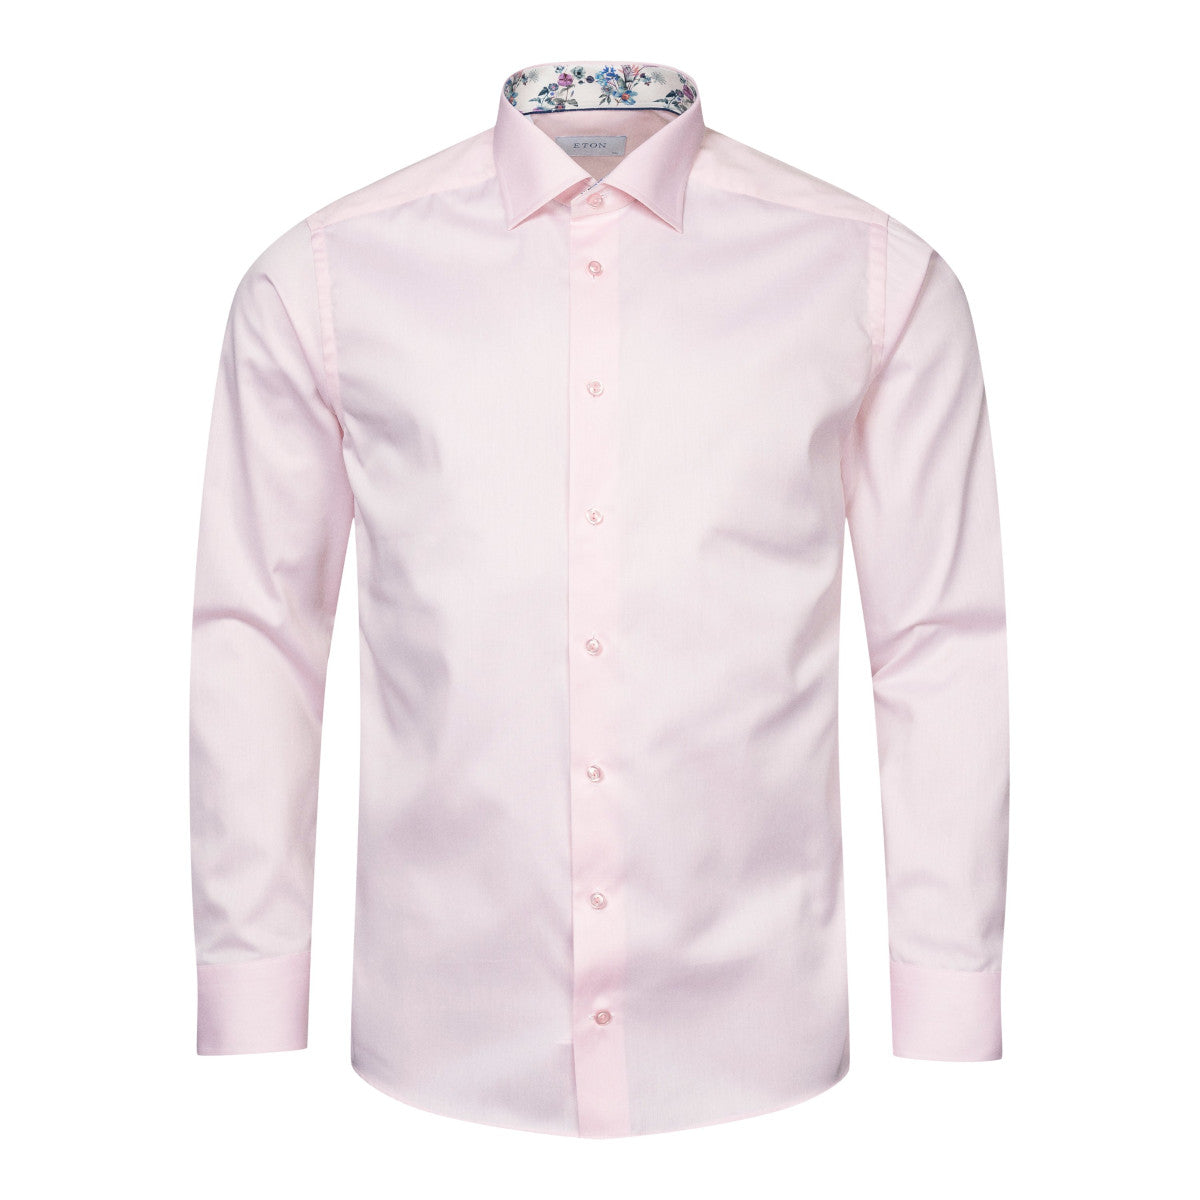 Eton Contemporary Fit Floral Trim Twill Shirt 80 Pink